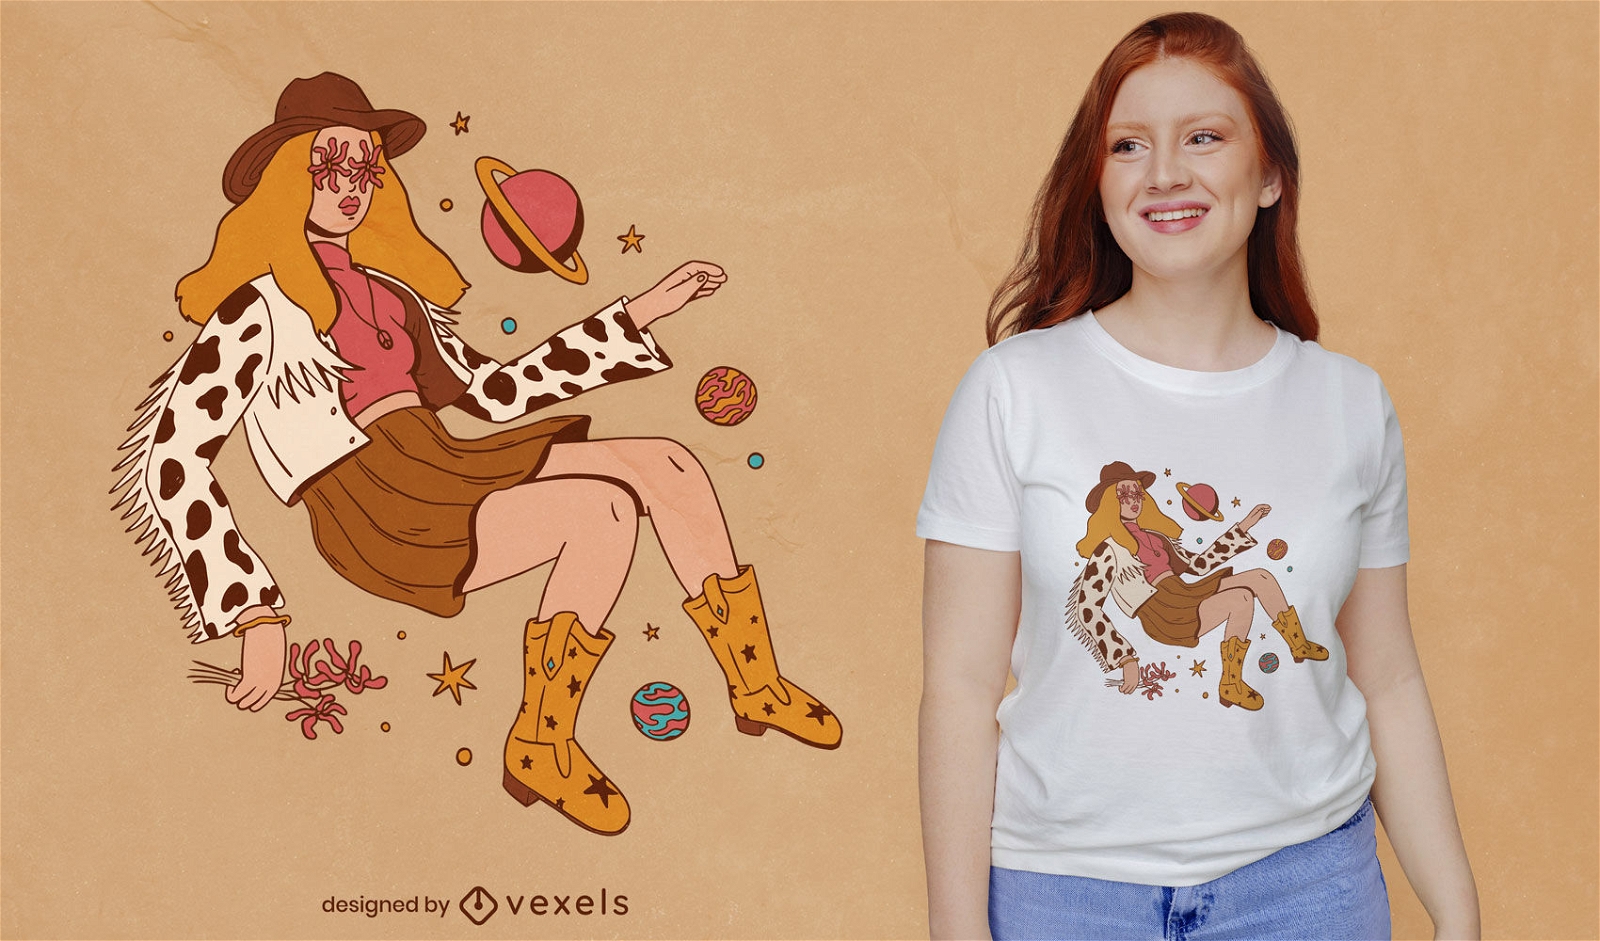 Hippie cowgirl in space t-shirt design